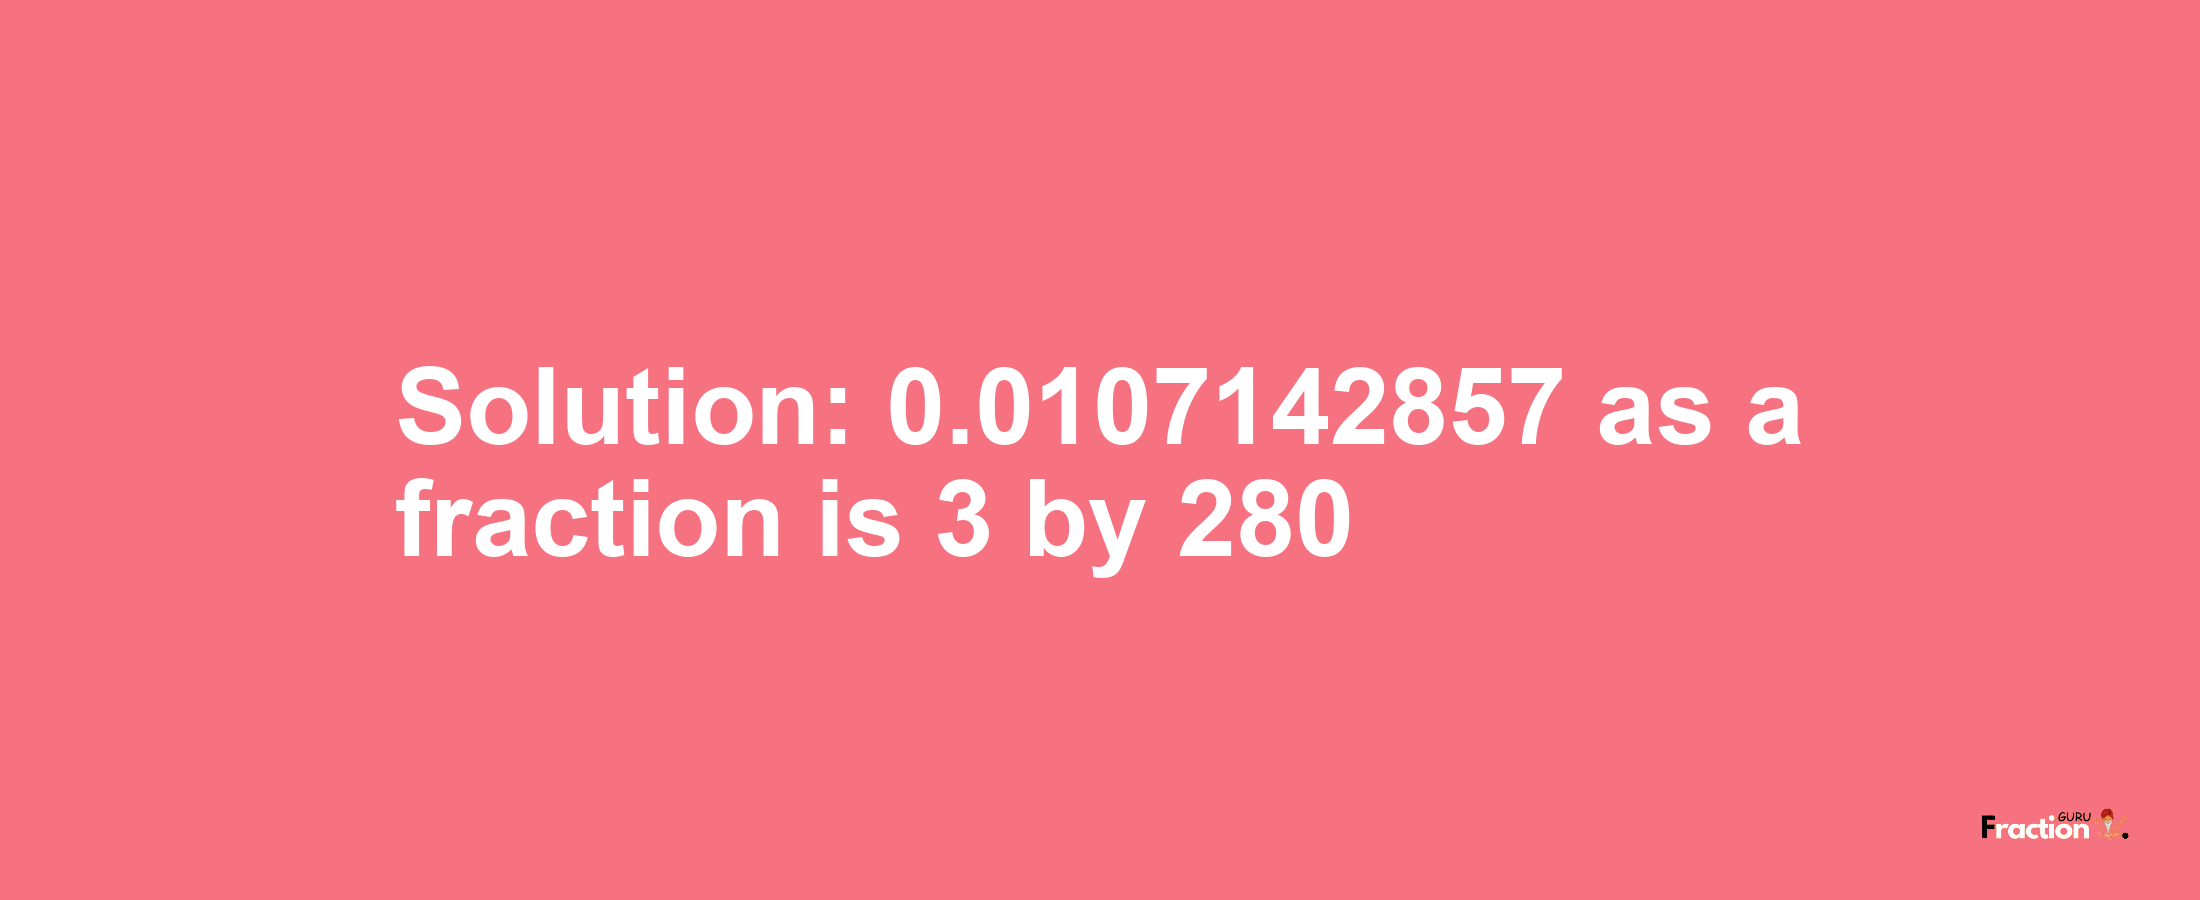 Solution:0.0107142857 as a fraction is 3/280